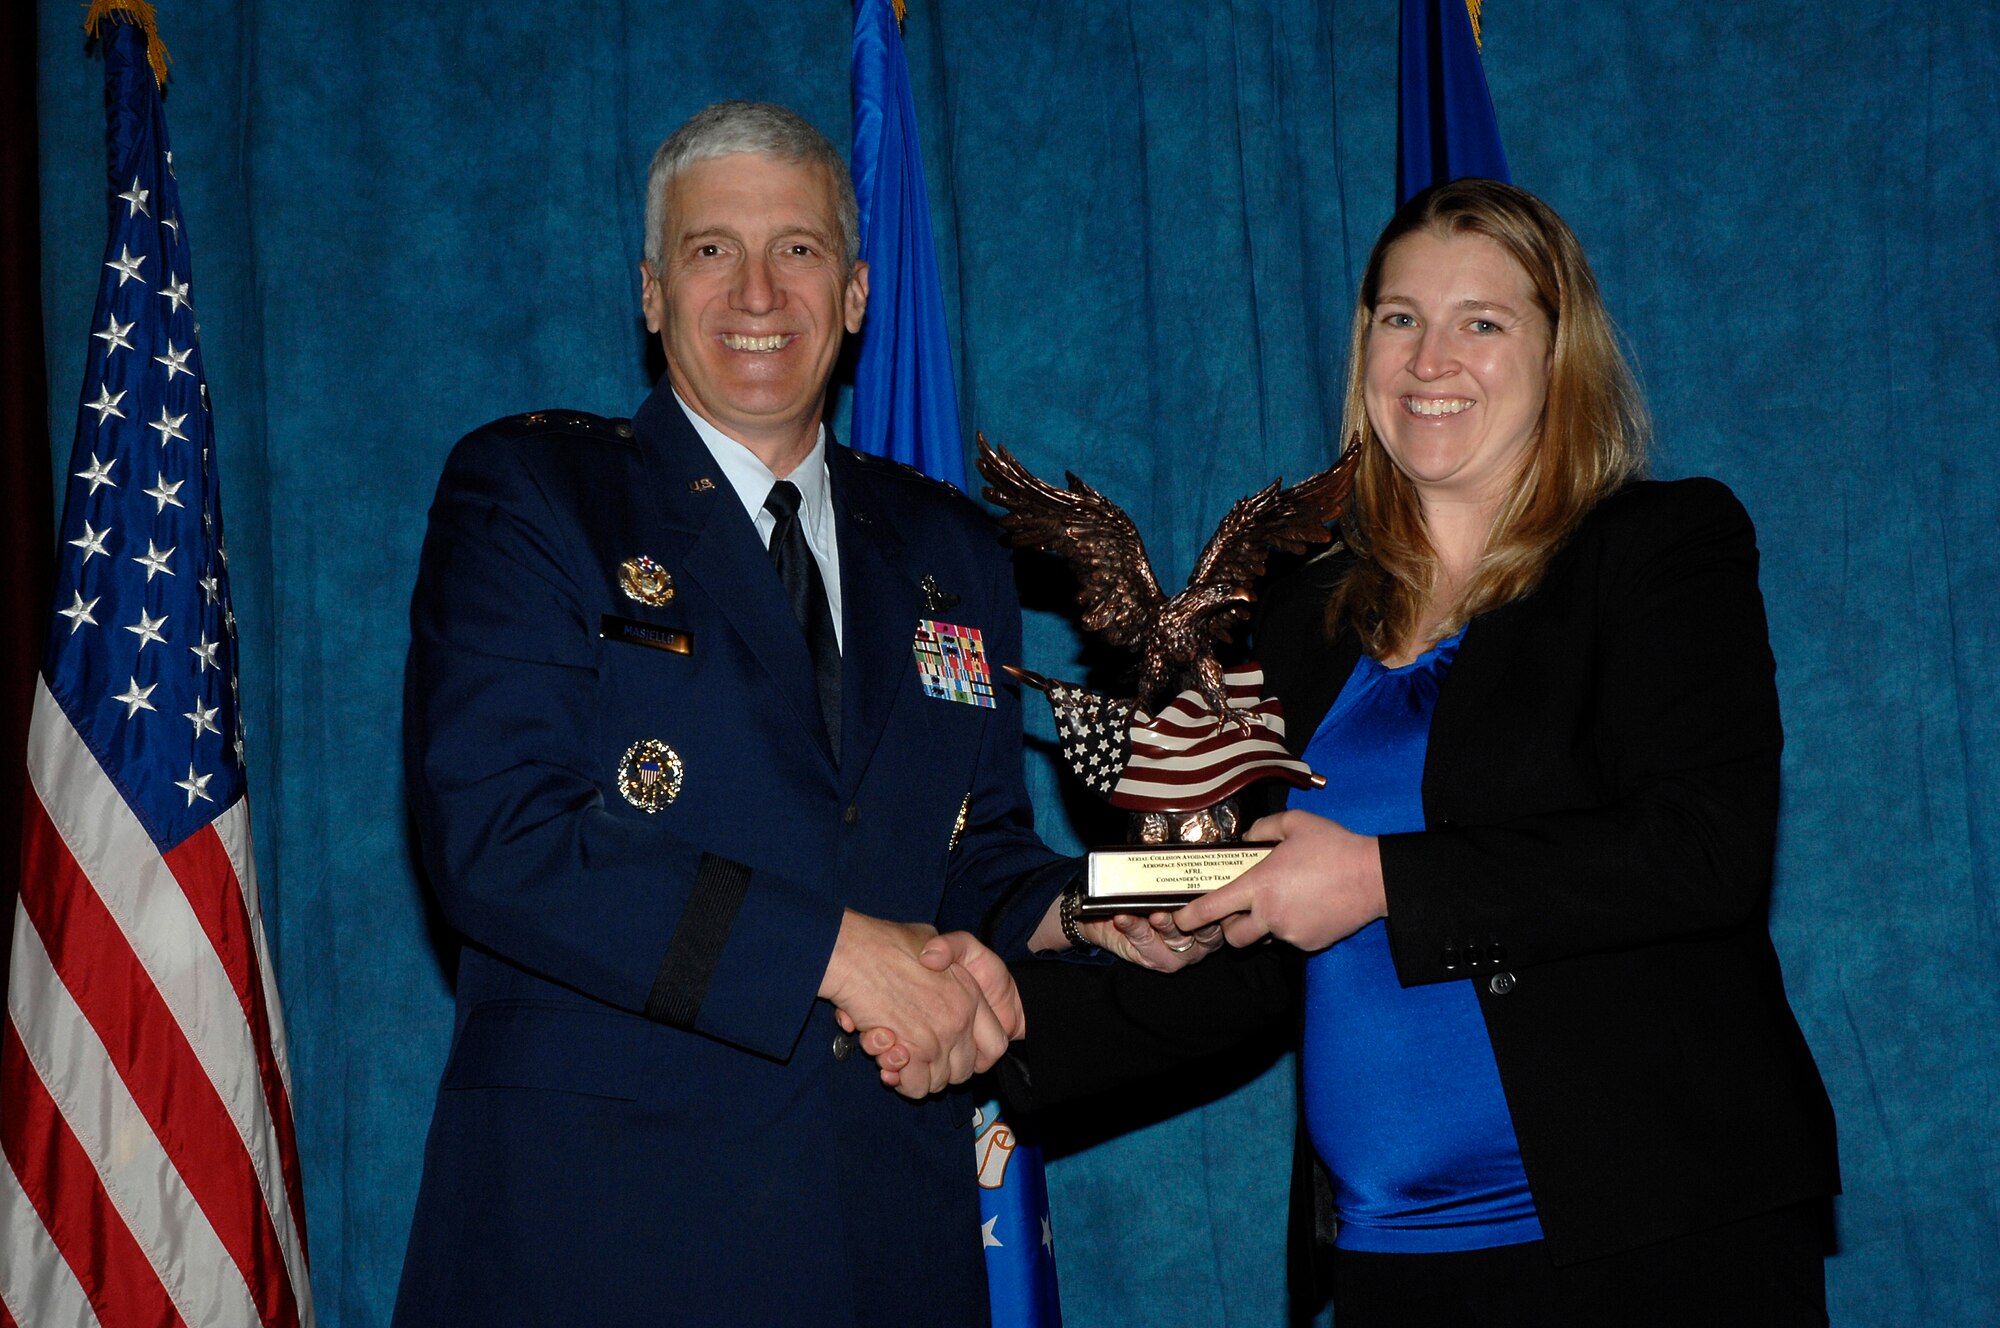 Maj. Gen. Tom Masiello, AFRL commander, presents Amy Burns, a member of the Aerial Collision Avoidance System Team, with a Commander’s Cup Team award during the 2015 AFRL Annual Awards ceremony. (U.S. Air Force photo by Albert Bright)